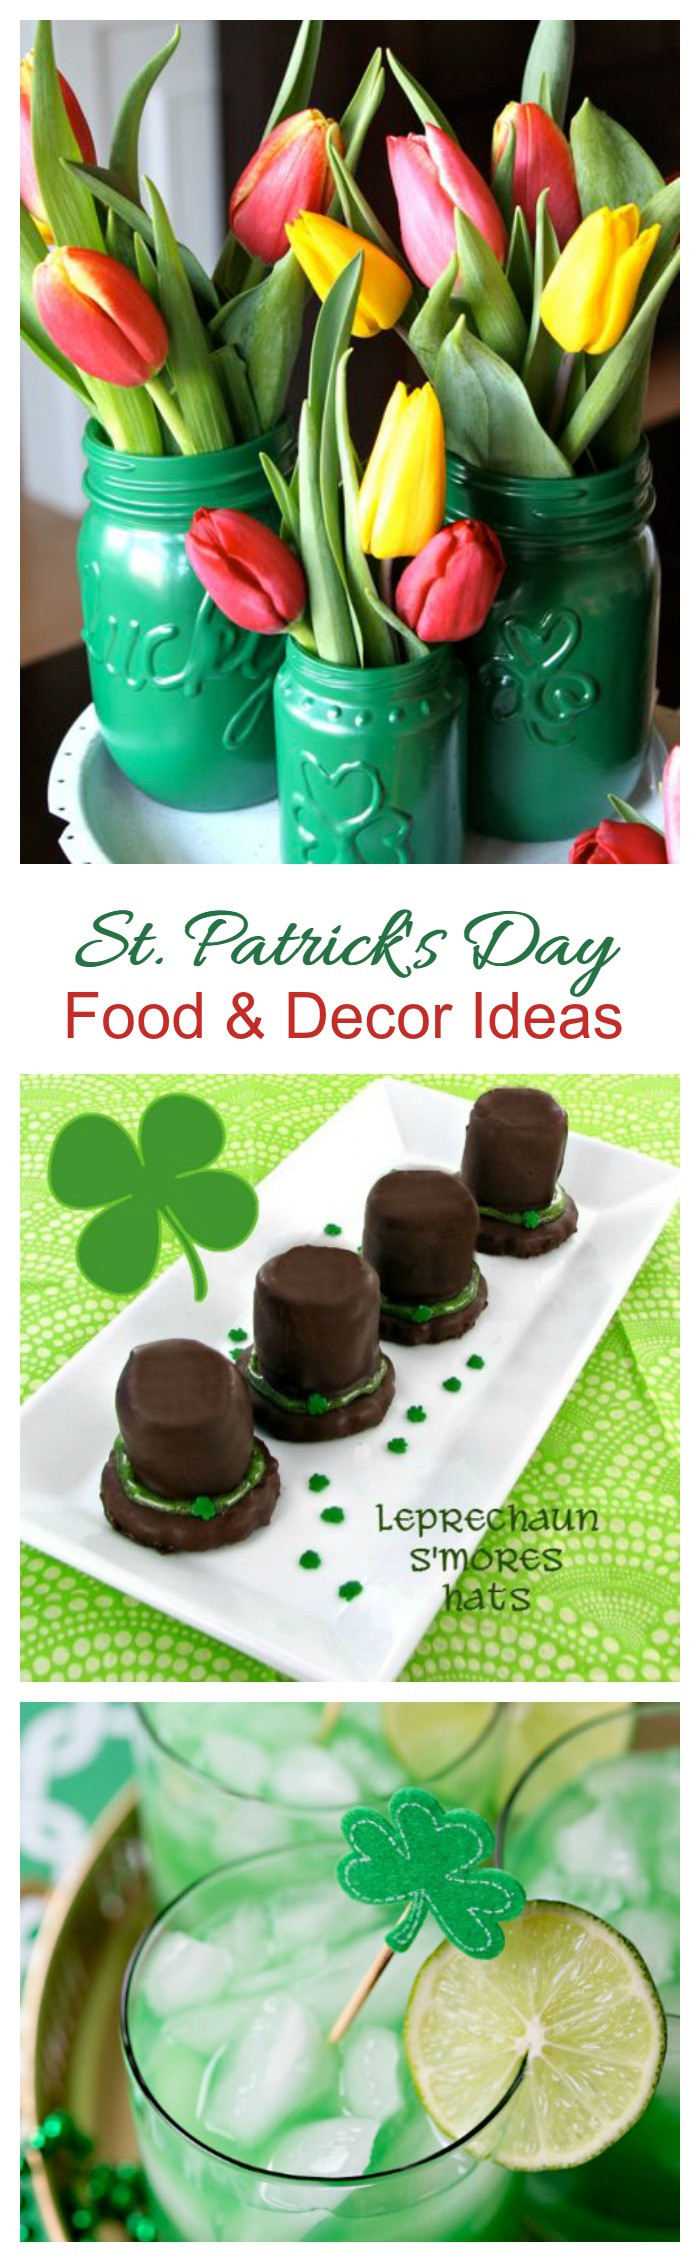 Food For St Patrick's Day Party
 St Patrick s Day Fun Food & DIY